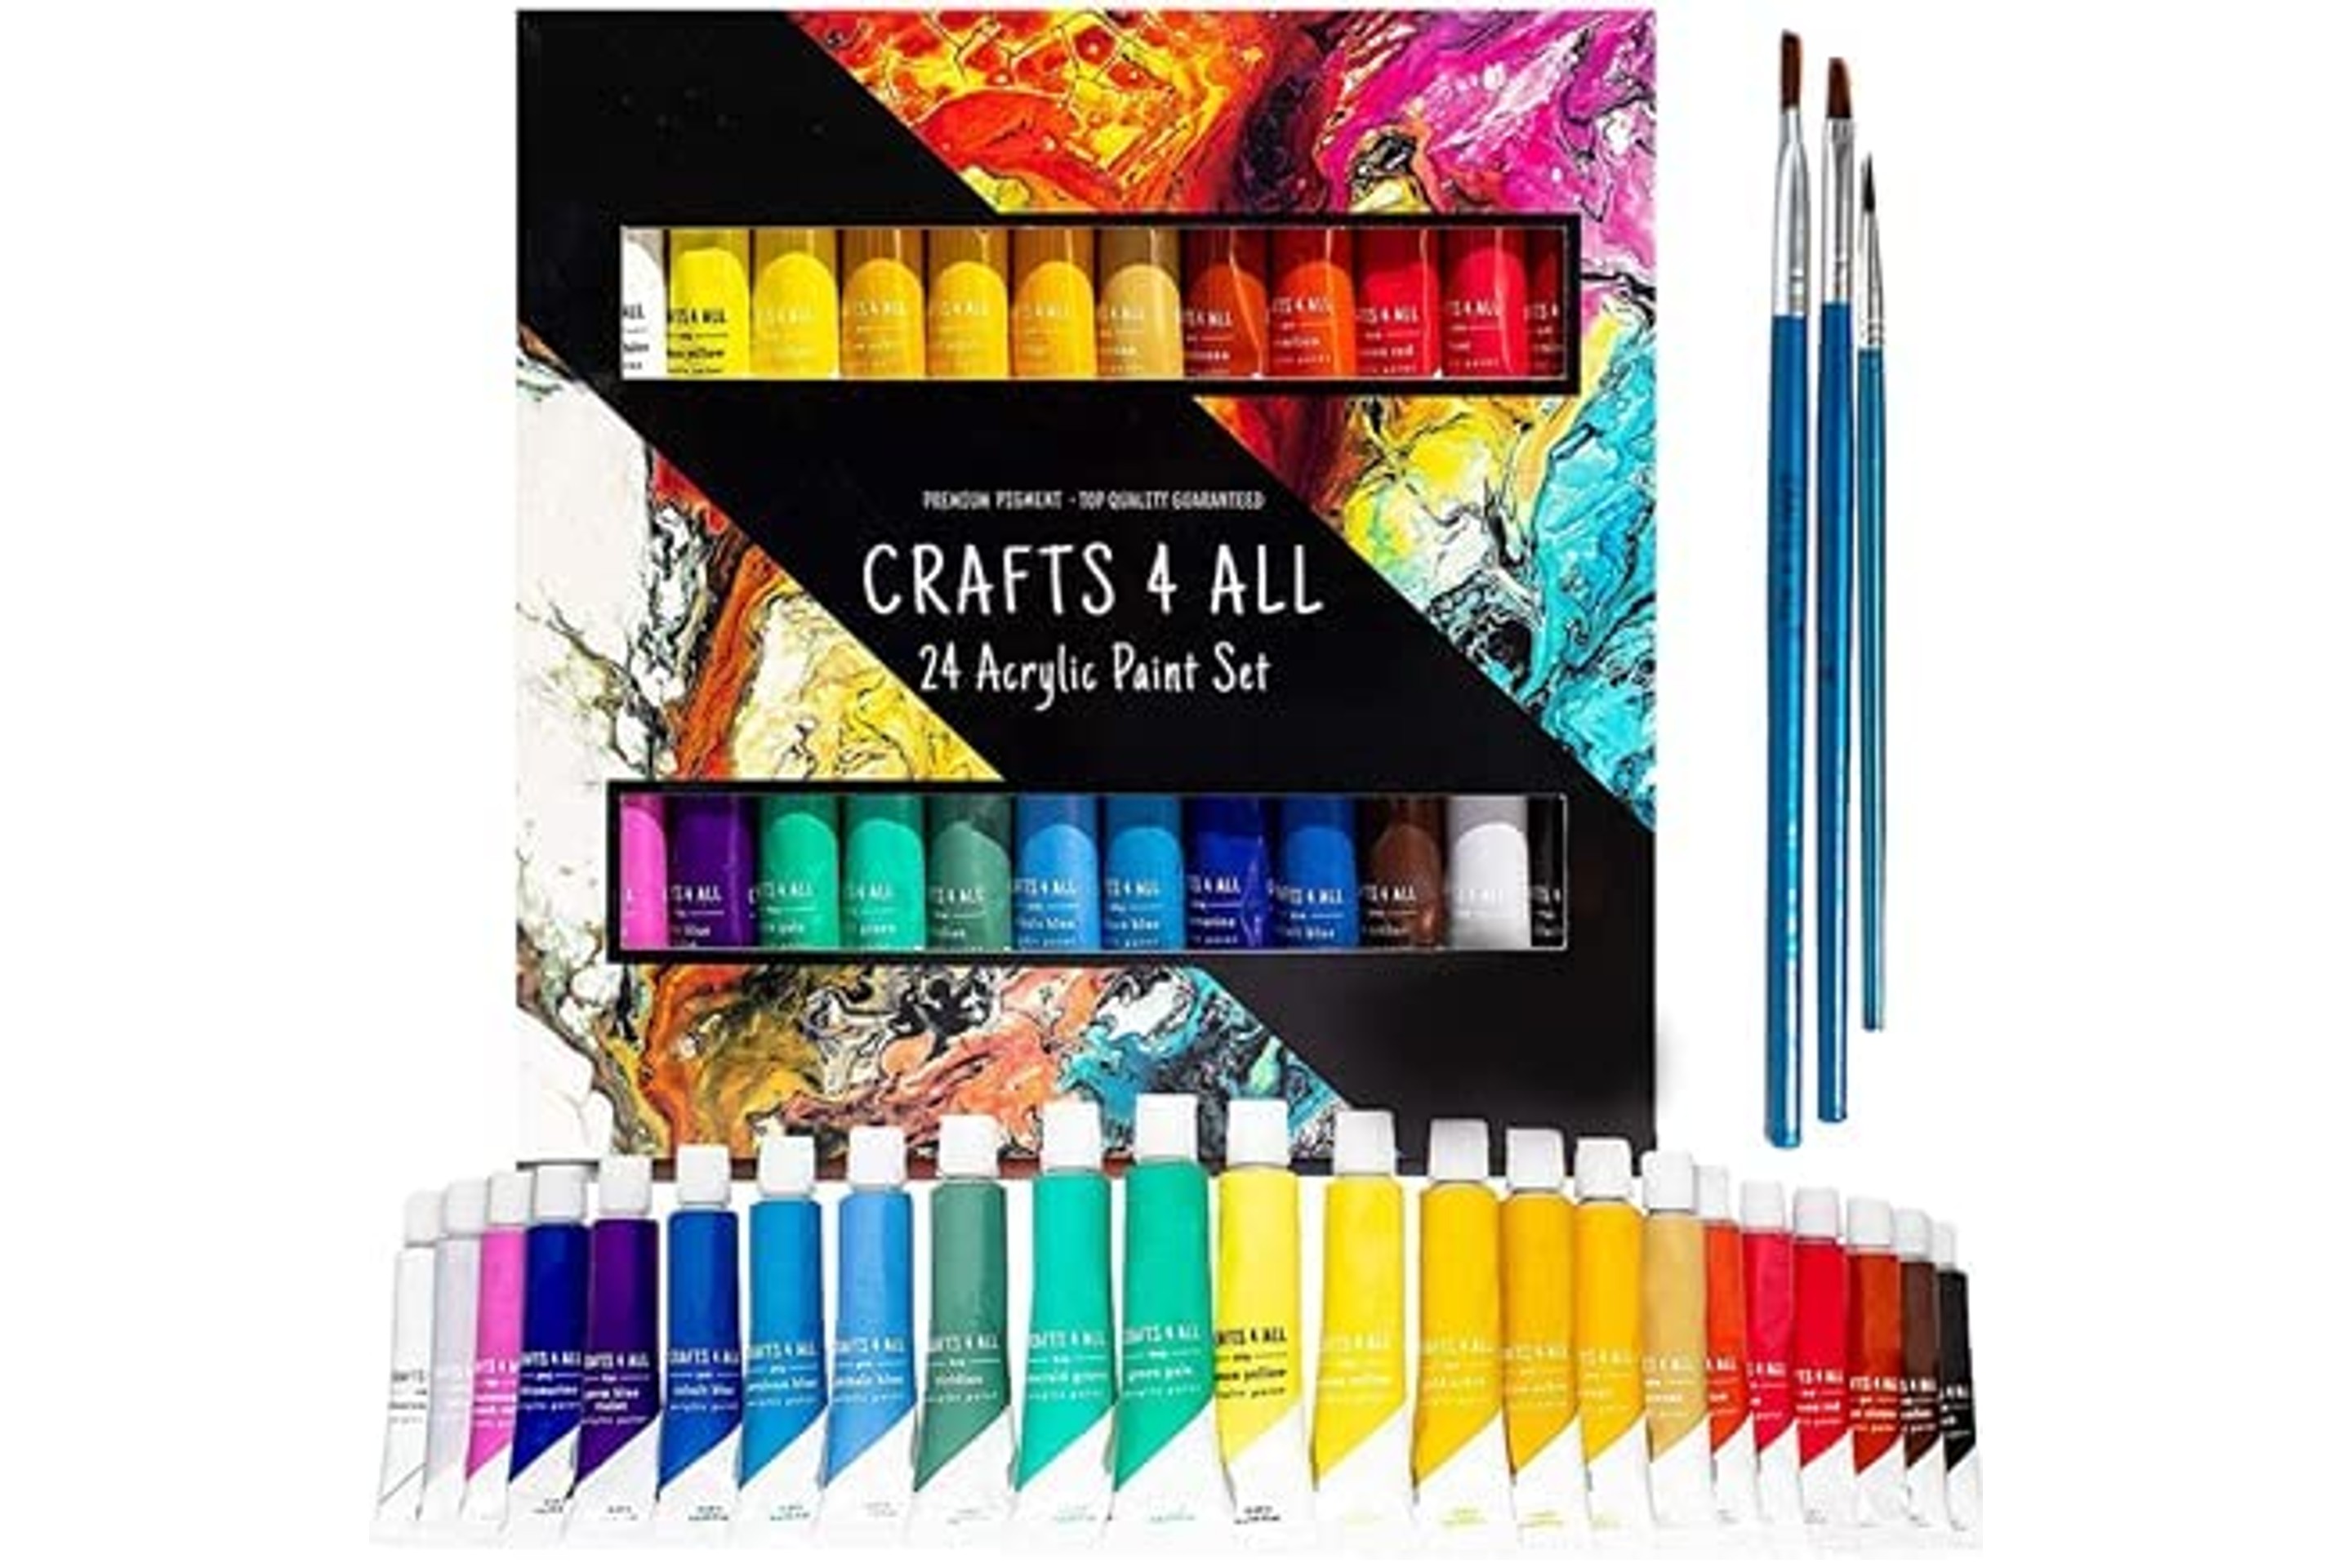 Crafts 4 All Acrylic Paint Set for Adults and Kids